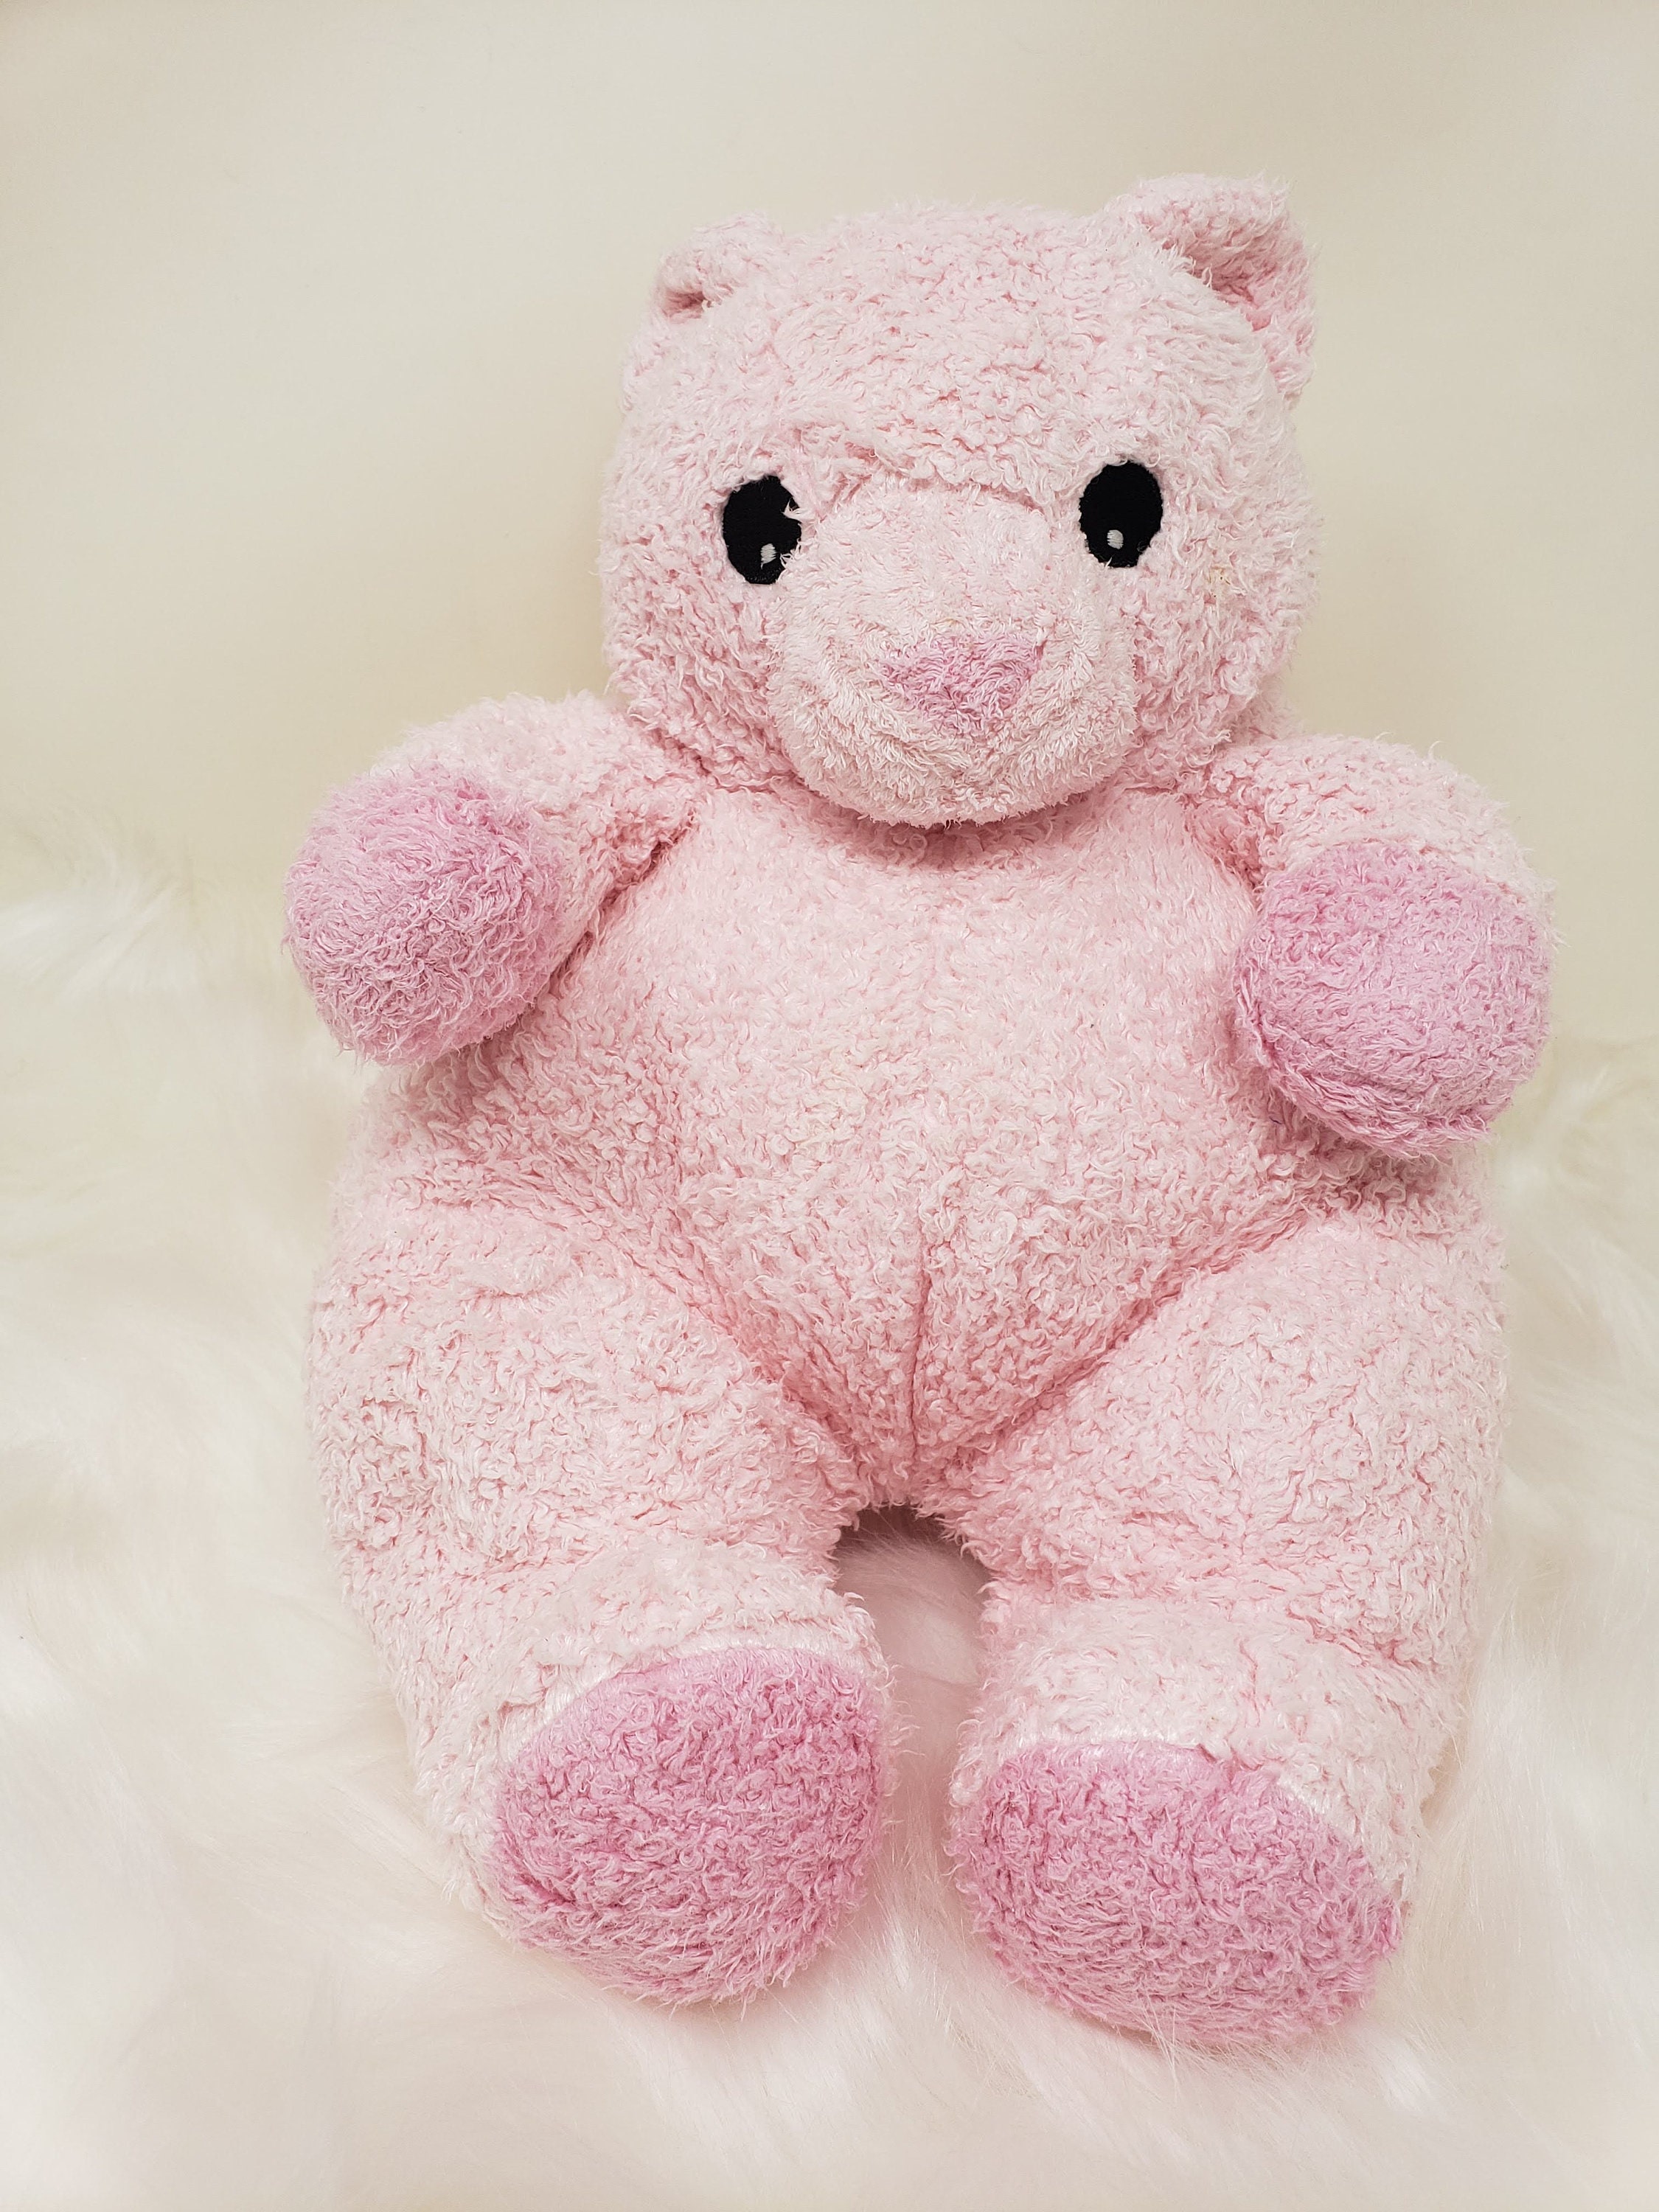 TY Pillow Pals 1994 Baby Pink Snuggy Teddy Bear Style 3001 NWT 14"